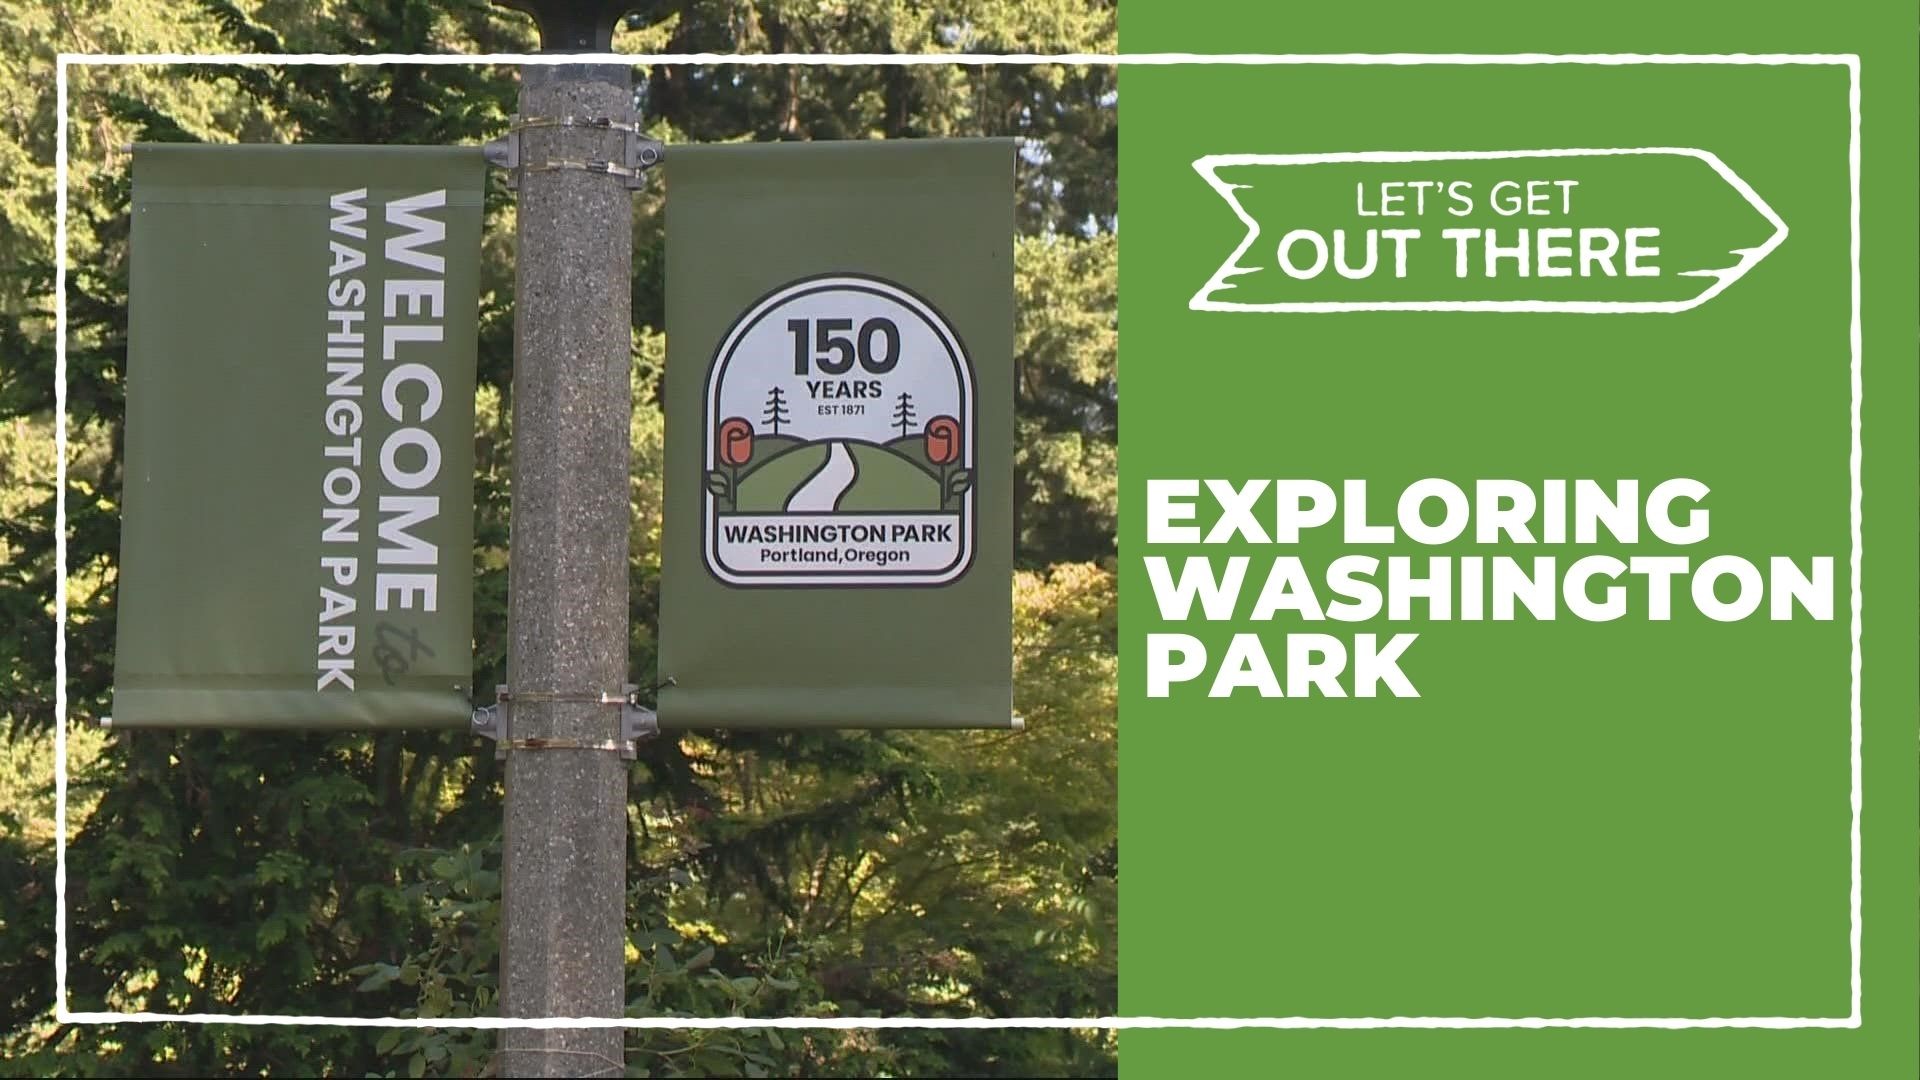 KGW’s Jon Goodwin explores the many attractions at Portland’s Washington Park. It’s just a few minutes from downtown.